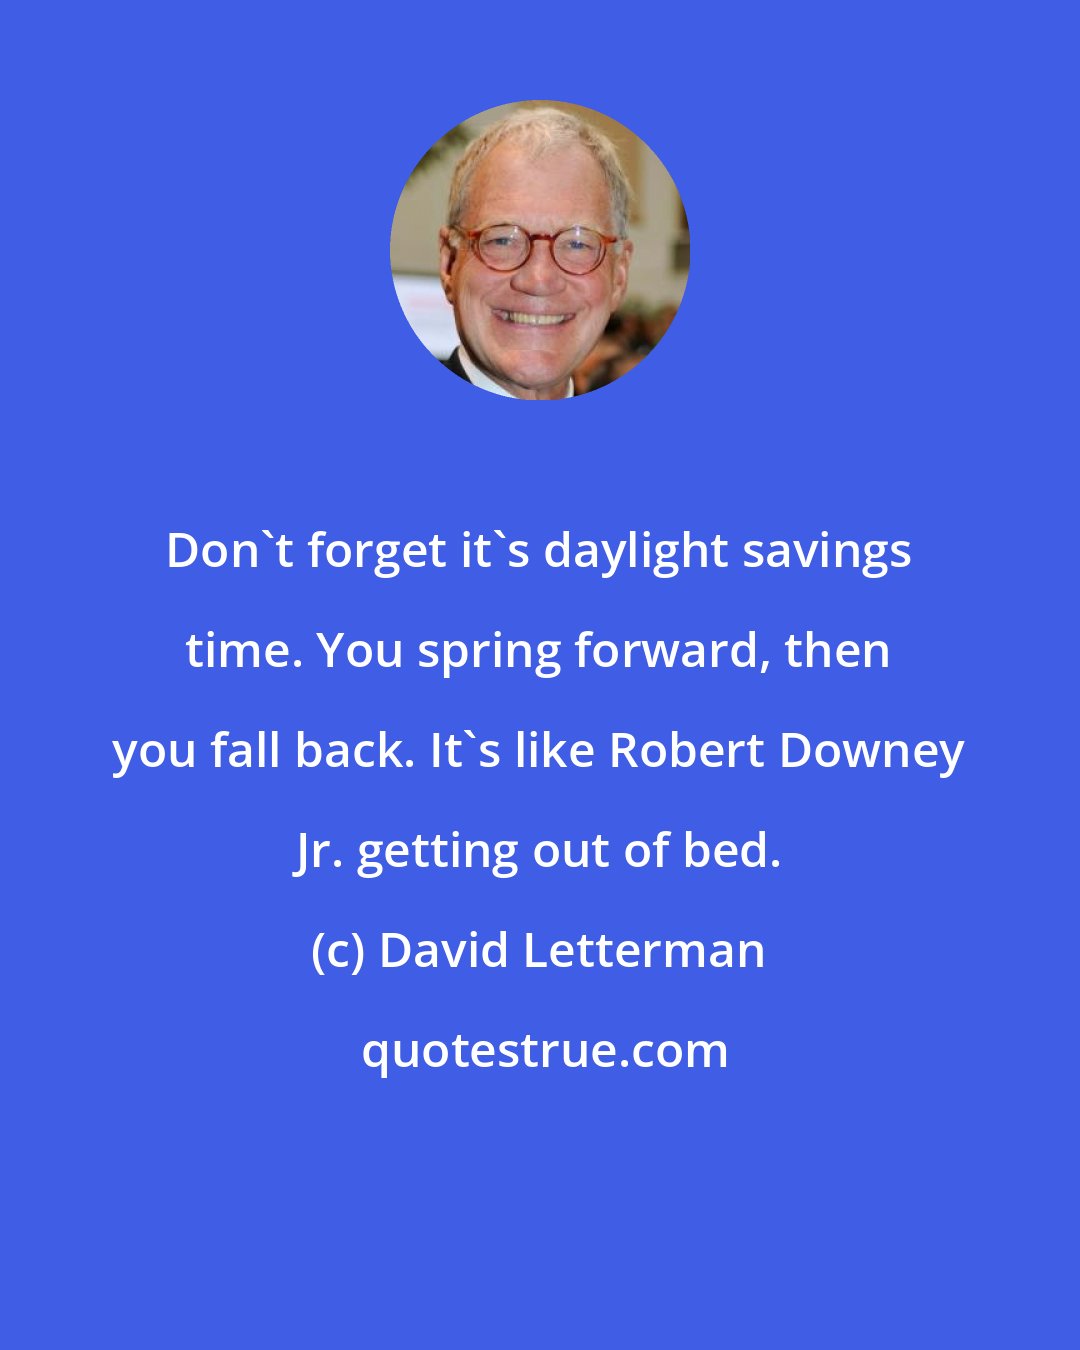 David Letterman: Don't forget it's daylight savings time. You spring forward, then you fall back. It's like Robert Downey Jr. getting out of bed.